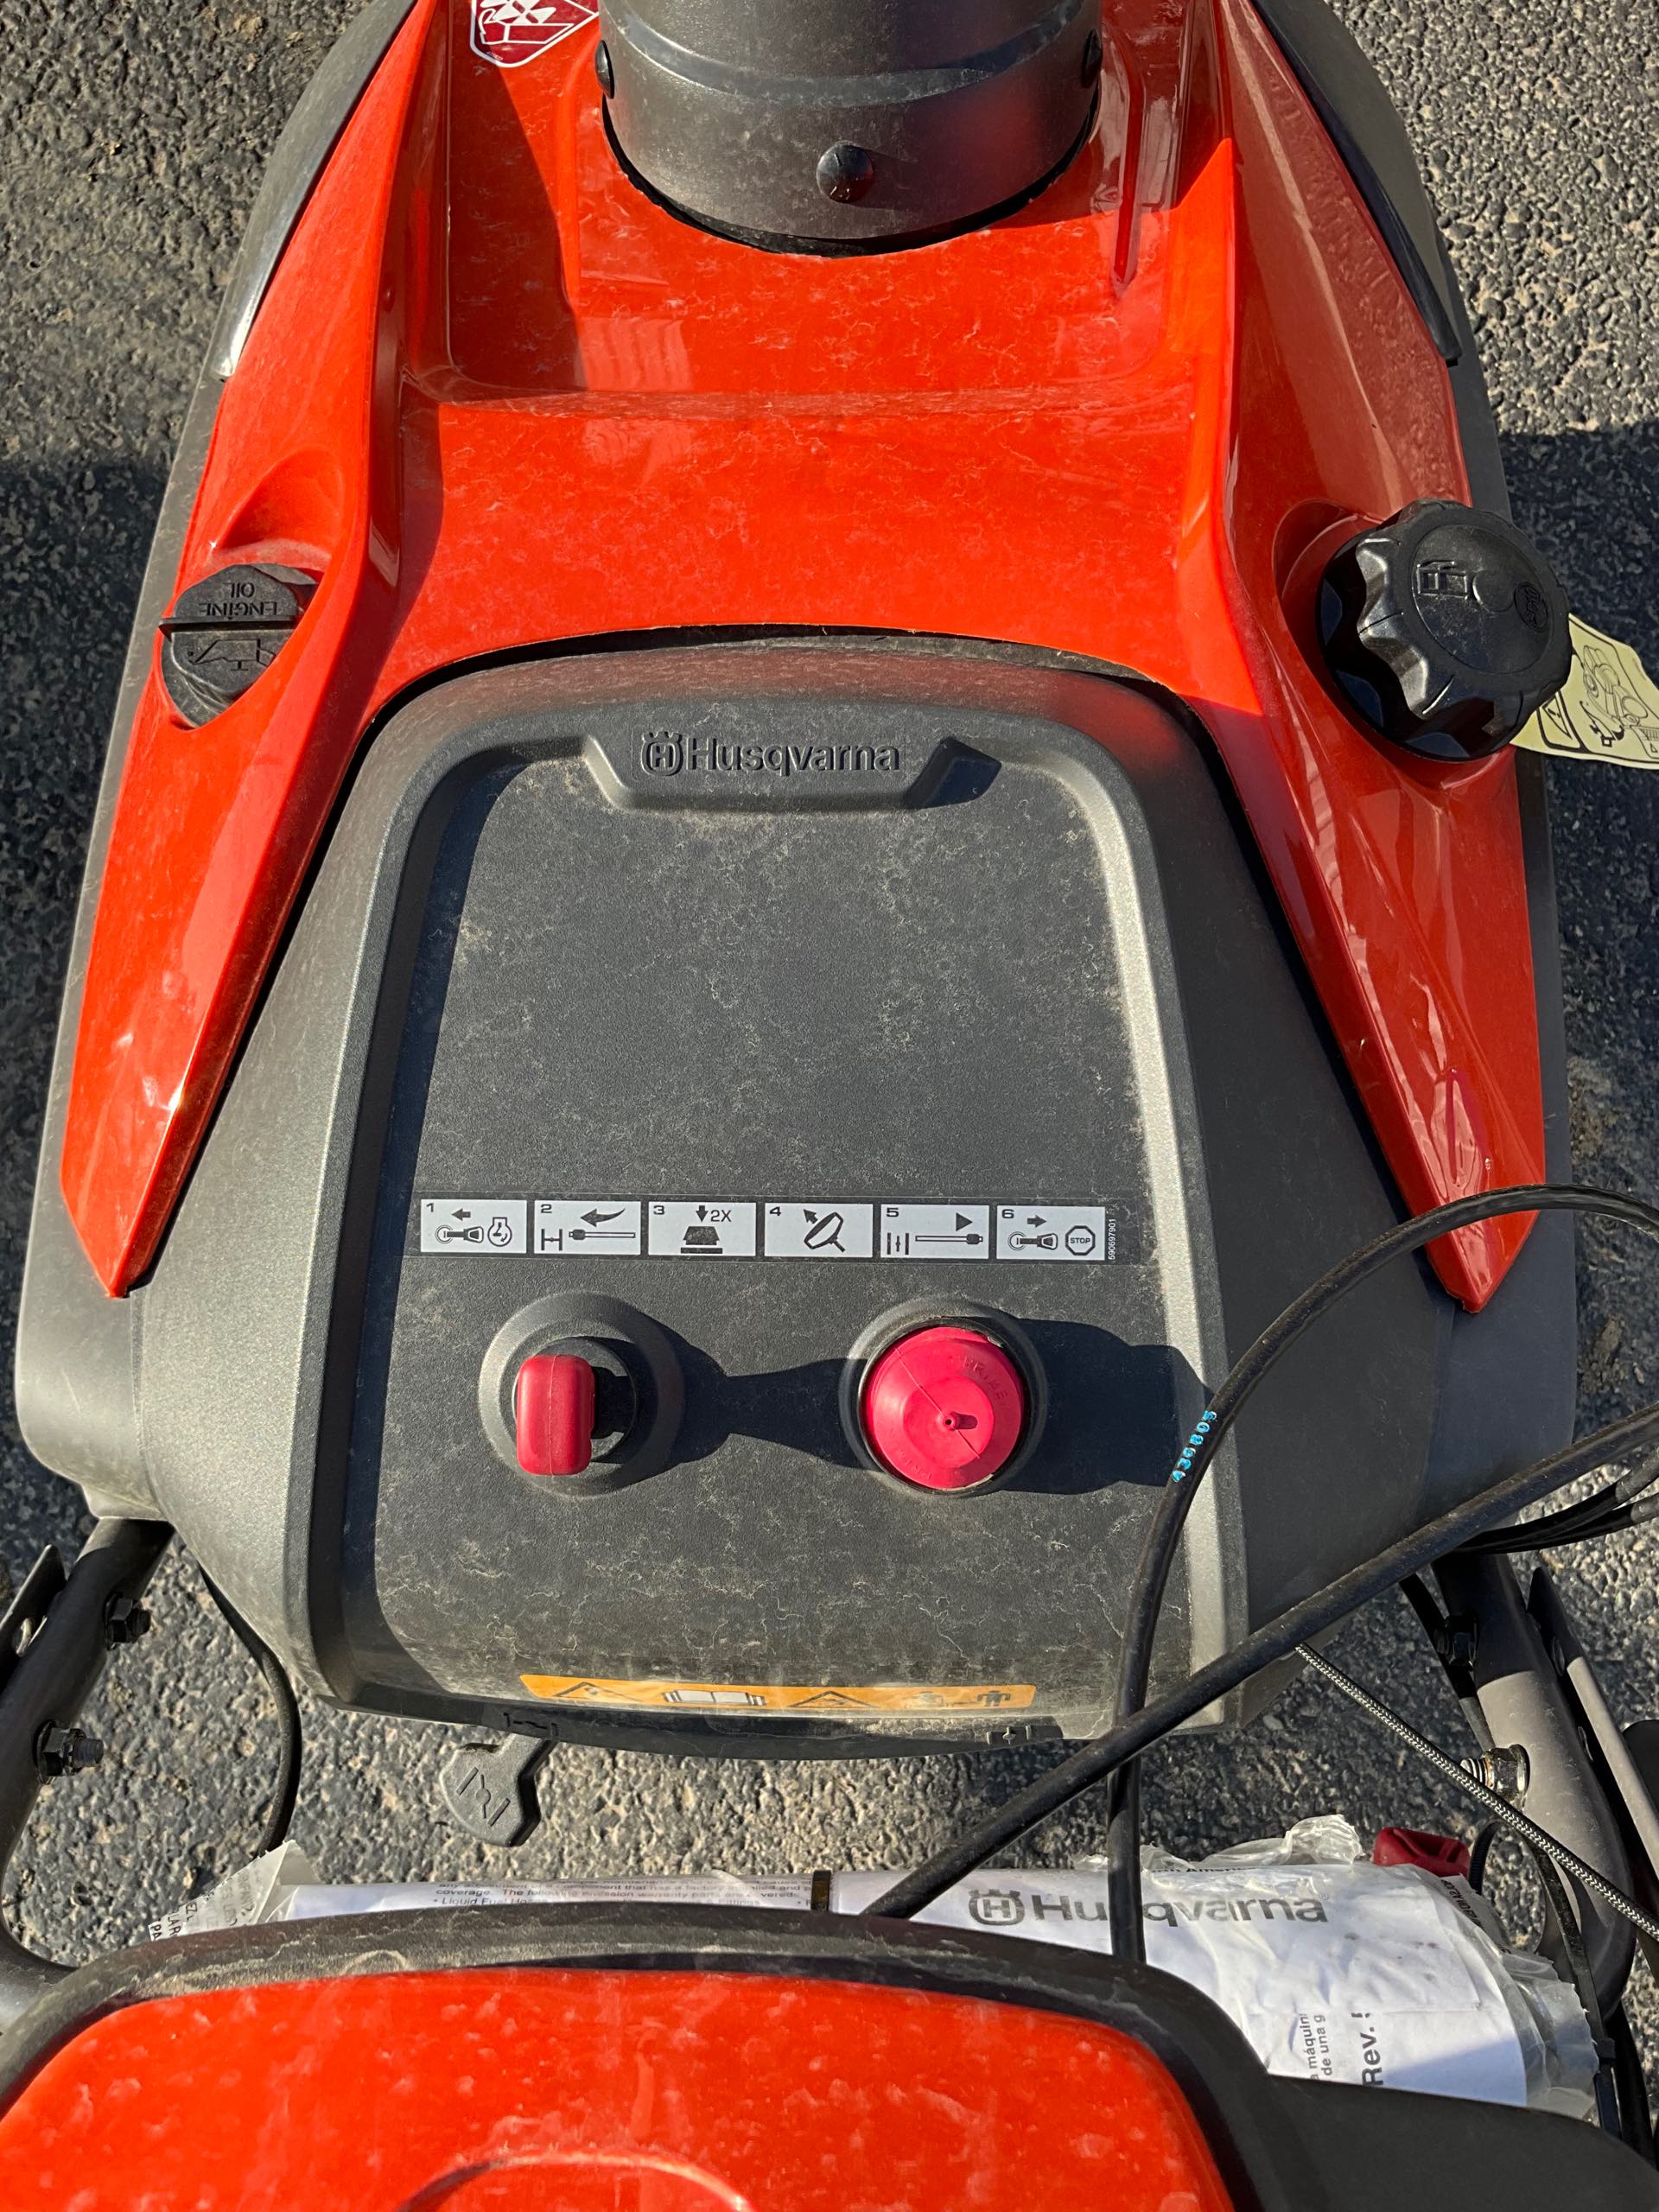 2018 Husqvarna Power Snow Blowers 100-series ST151 at Leisure Time Powersports of Corry